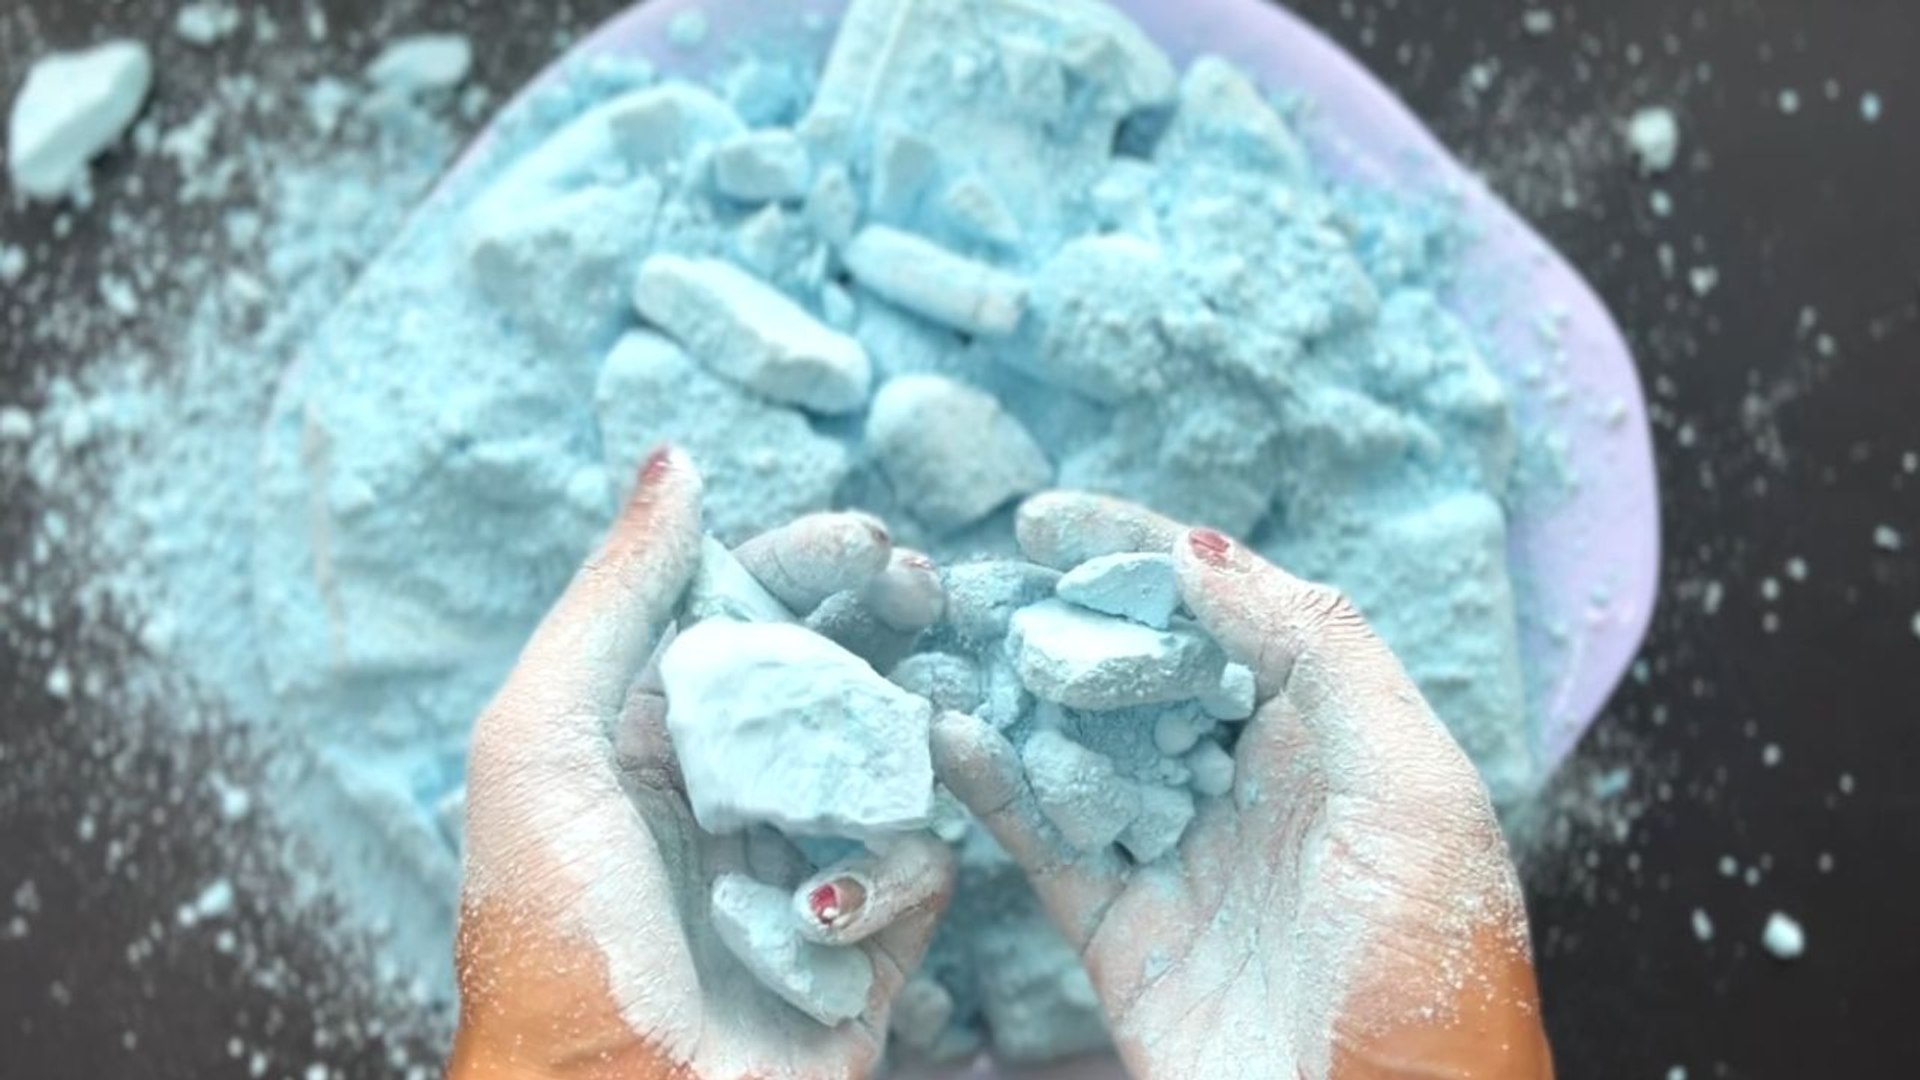 ASMR artist CRUSHES reformed gym chalk and plays with the powder  *TANTALIZING!*' - video Dailymotion